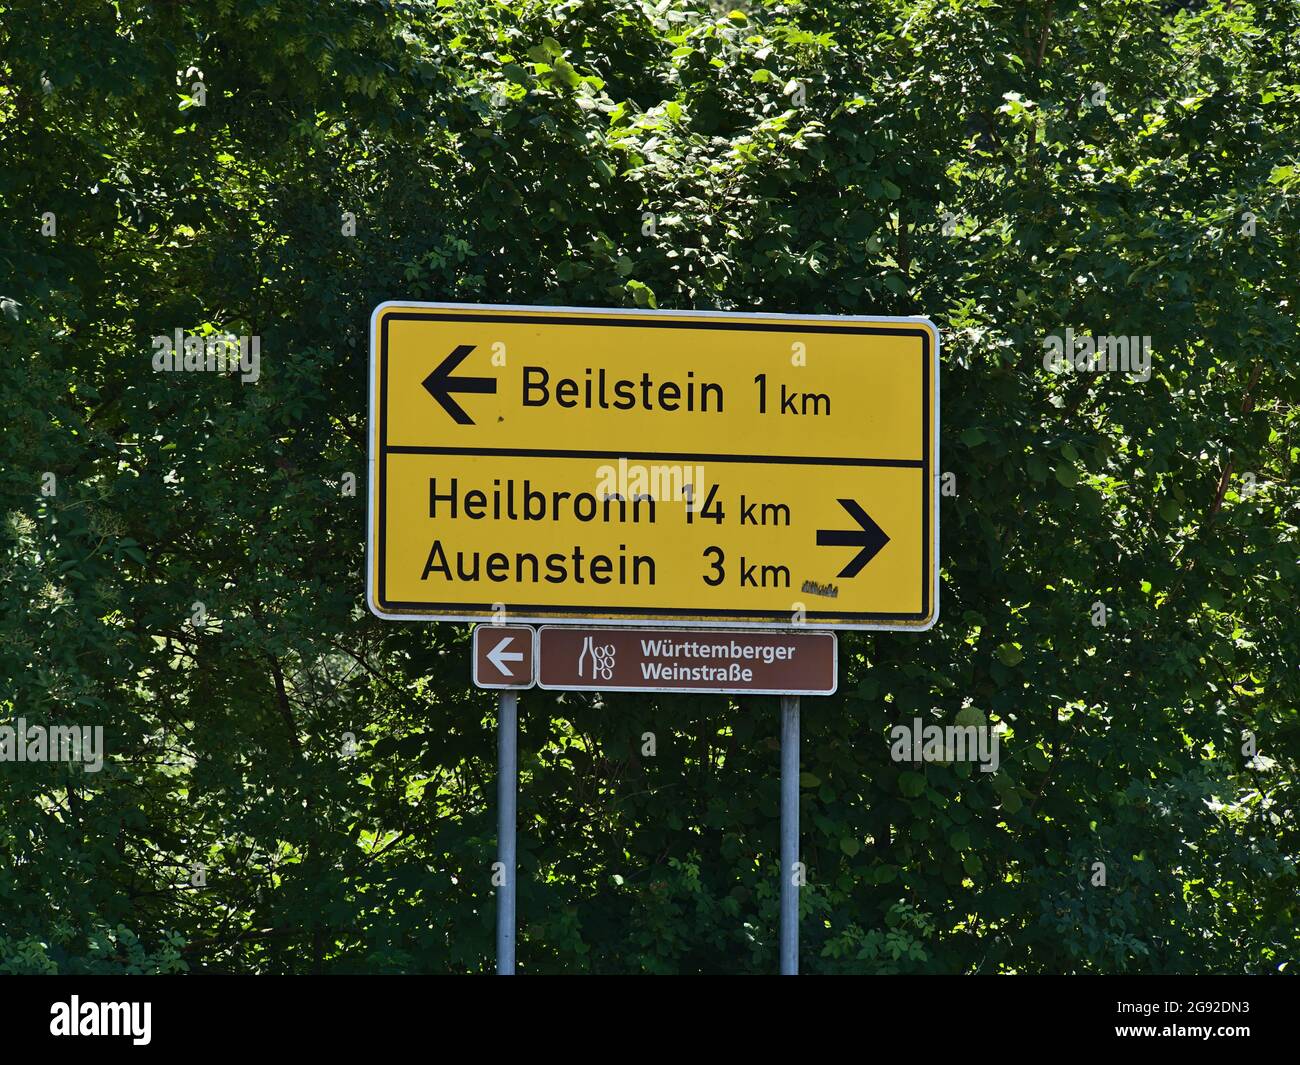 Directional sign with distances to Auenstein and city Heilbronn at junction of country road L1100, part of Württemberger Weinstraße, near Beilstein. Stock Photo